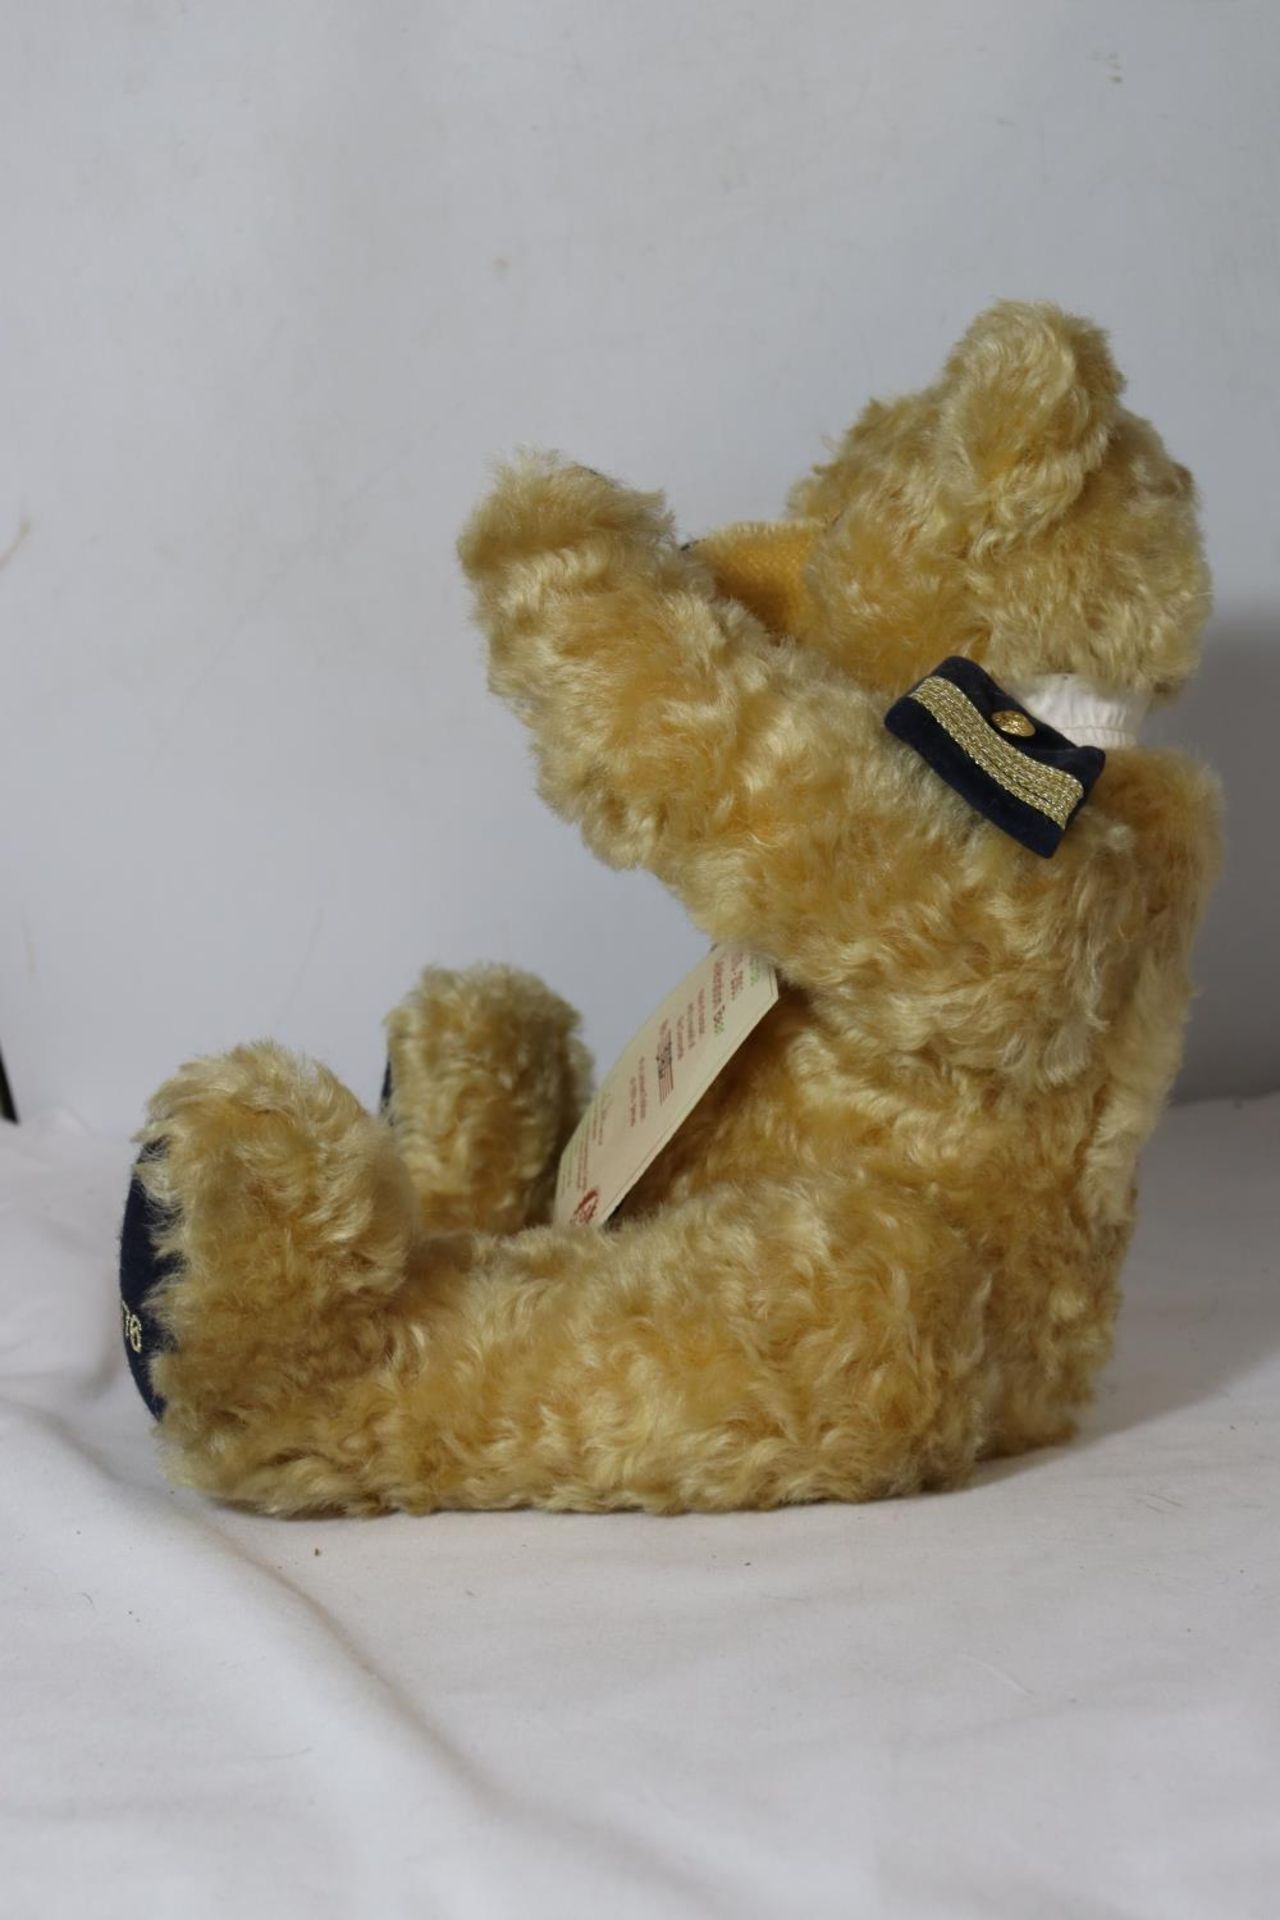 A STEIFF LIMITED EDITION 942 OF 1976 CONCORDE TEDDY BEAR COMPLETE WITH CERTIFICATE - Image 5 of 6